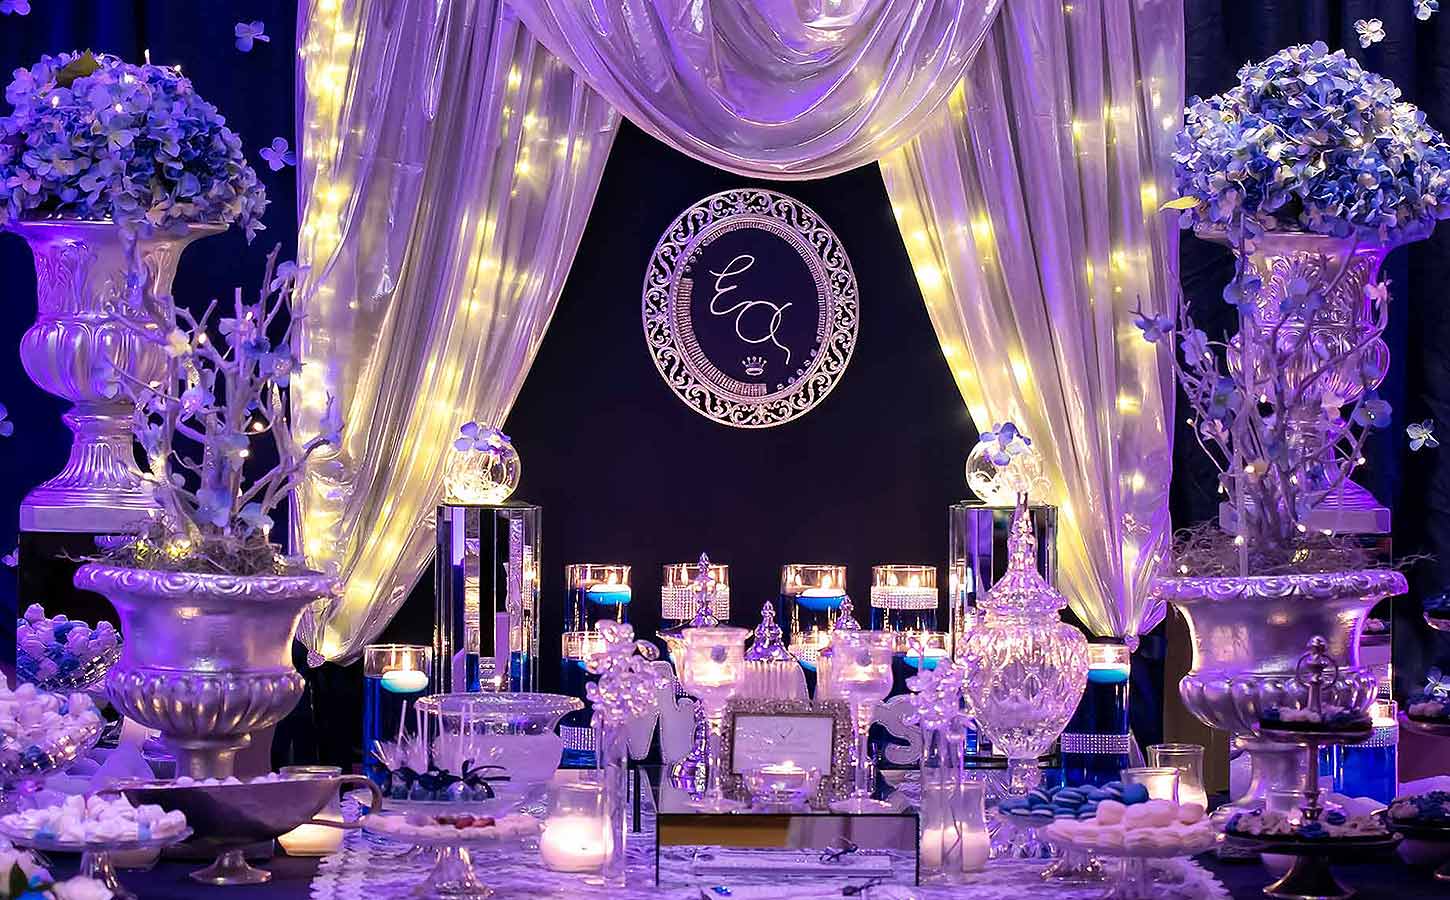 guest-book-table-in-blue-royal-table-diamond-events-luxury-event-planning-service